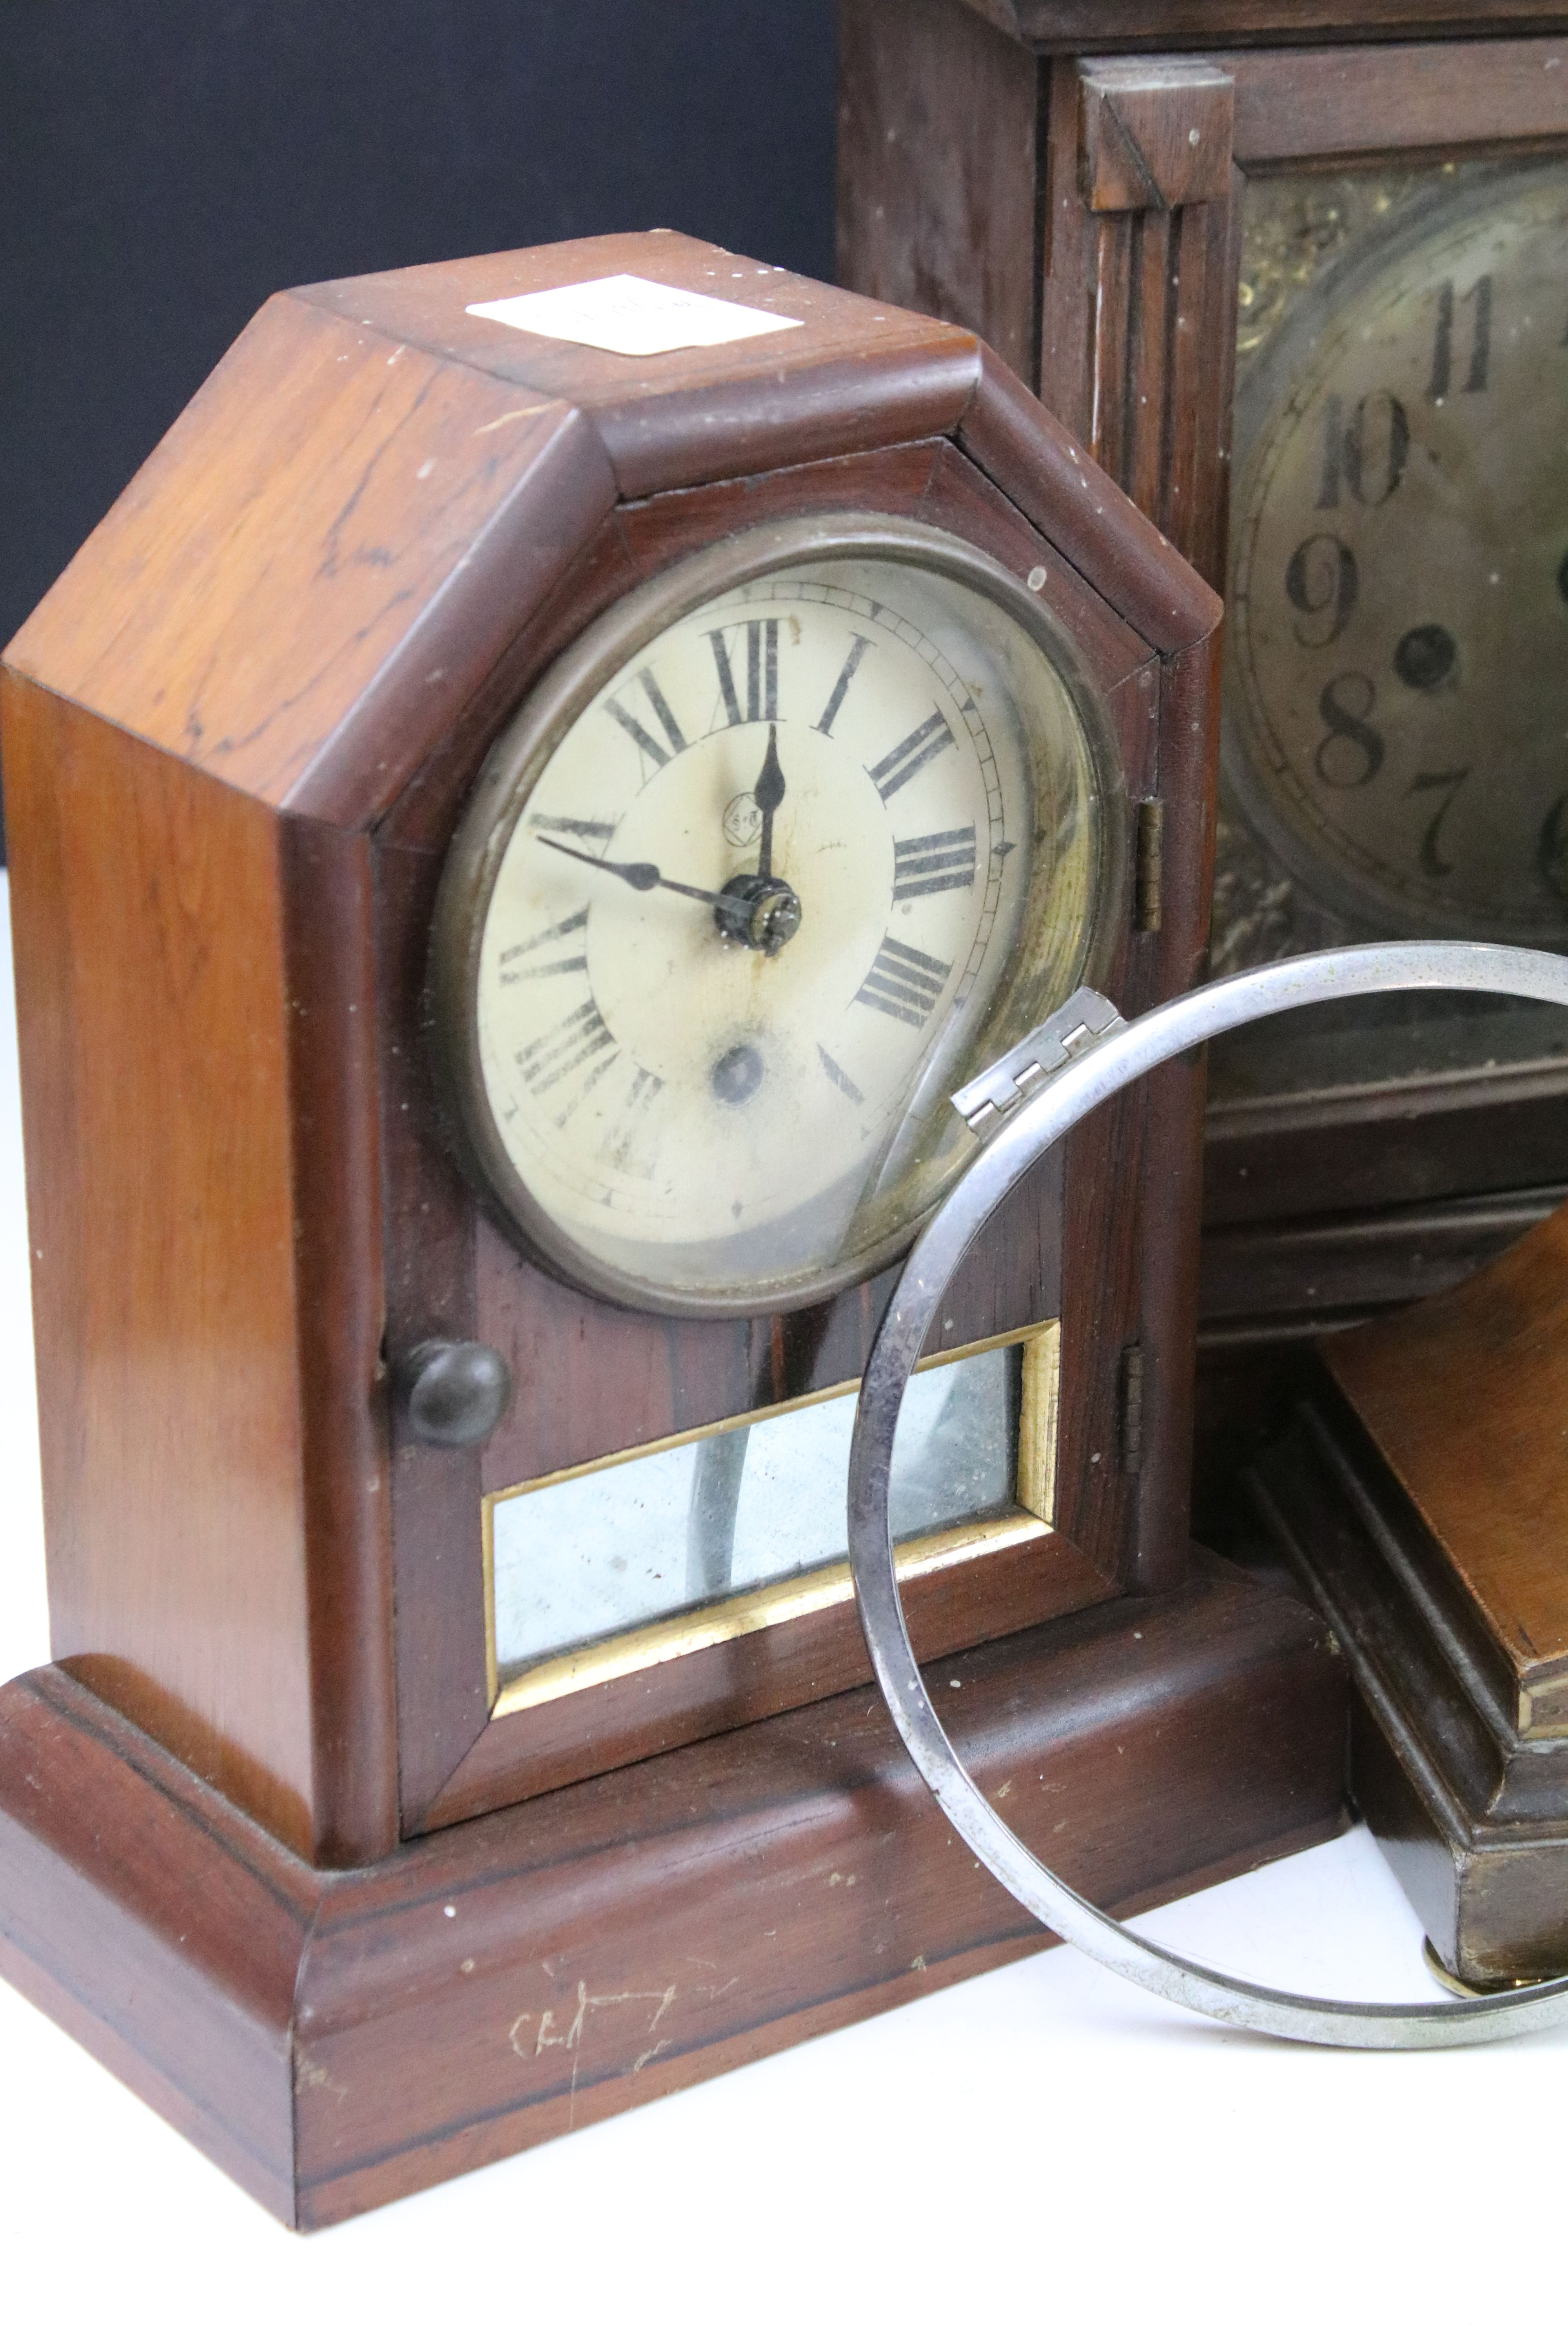 Collection of late 19th / early 20th century wooden mantel clocks and clock parts / movements, - Image 2 of 7